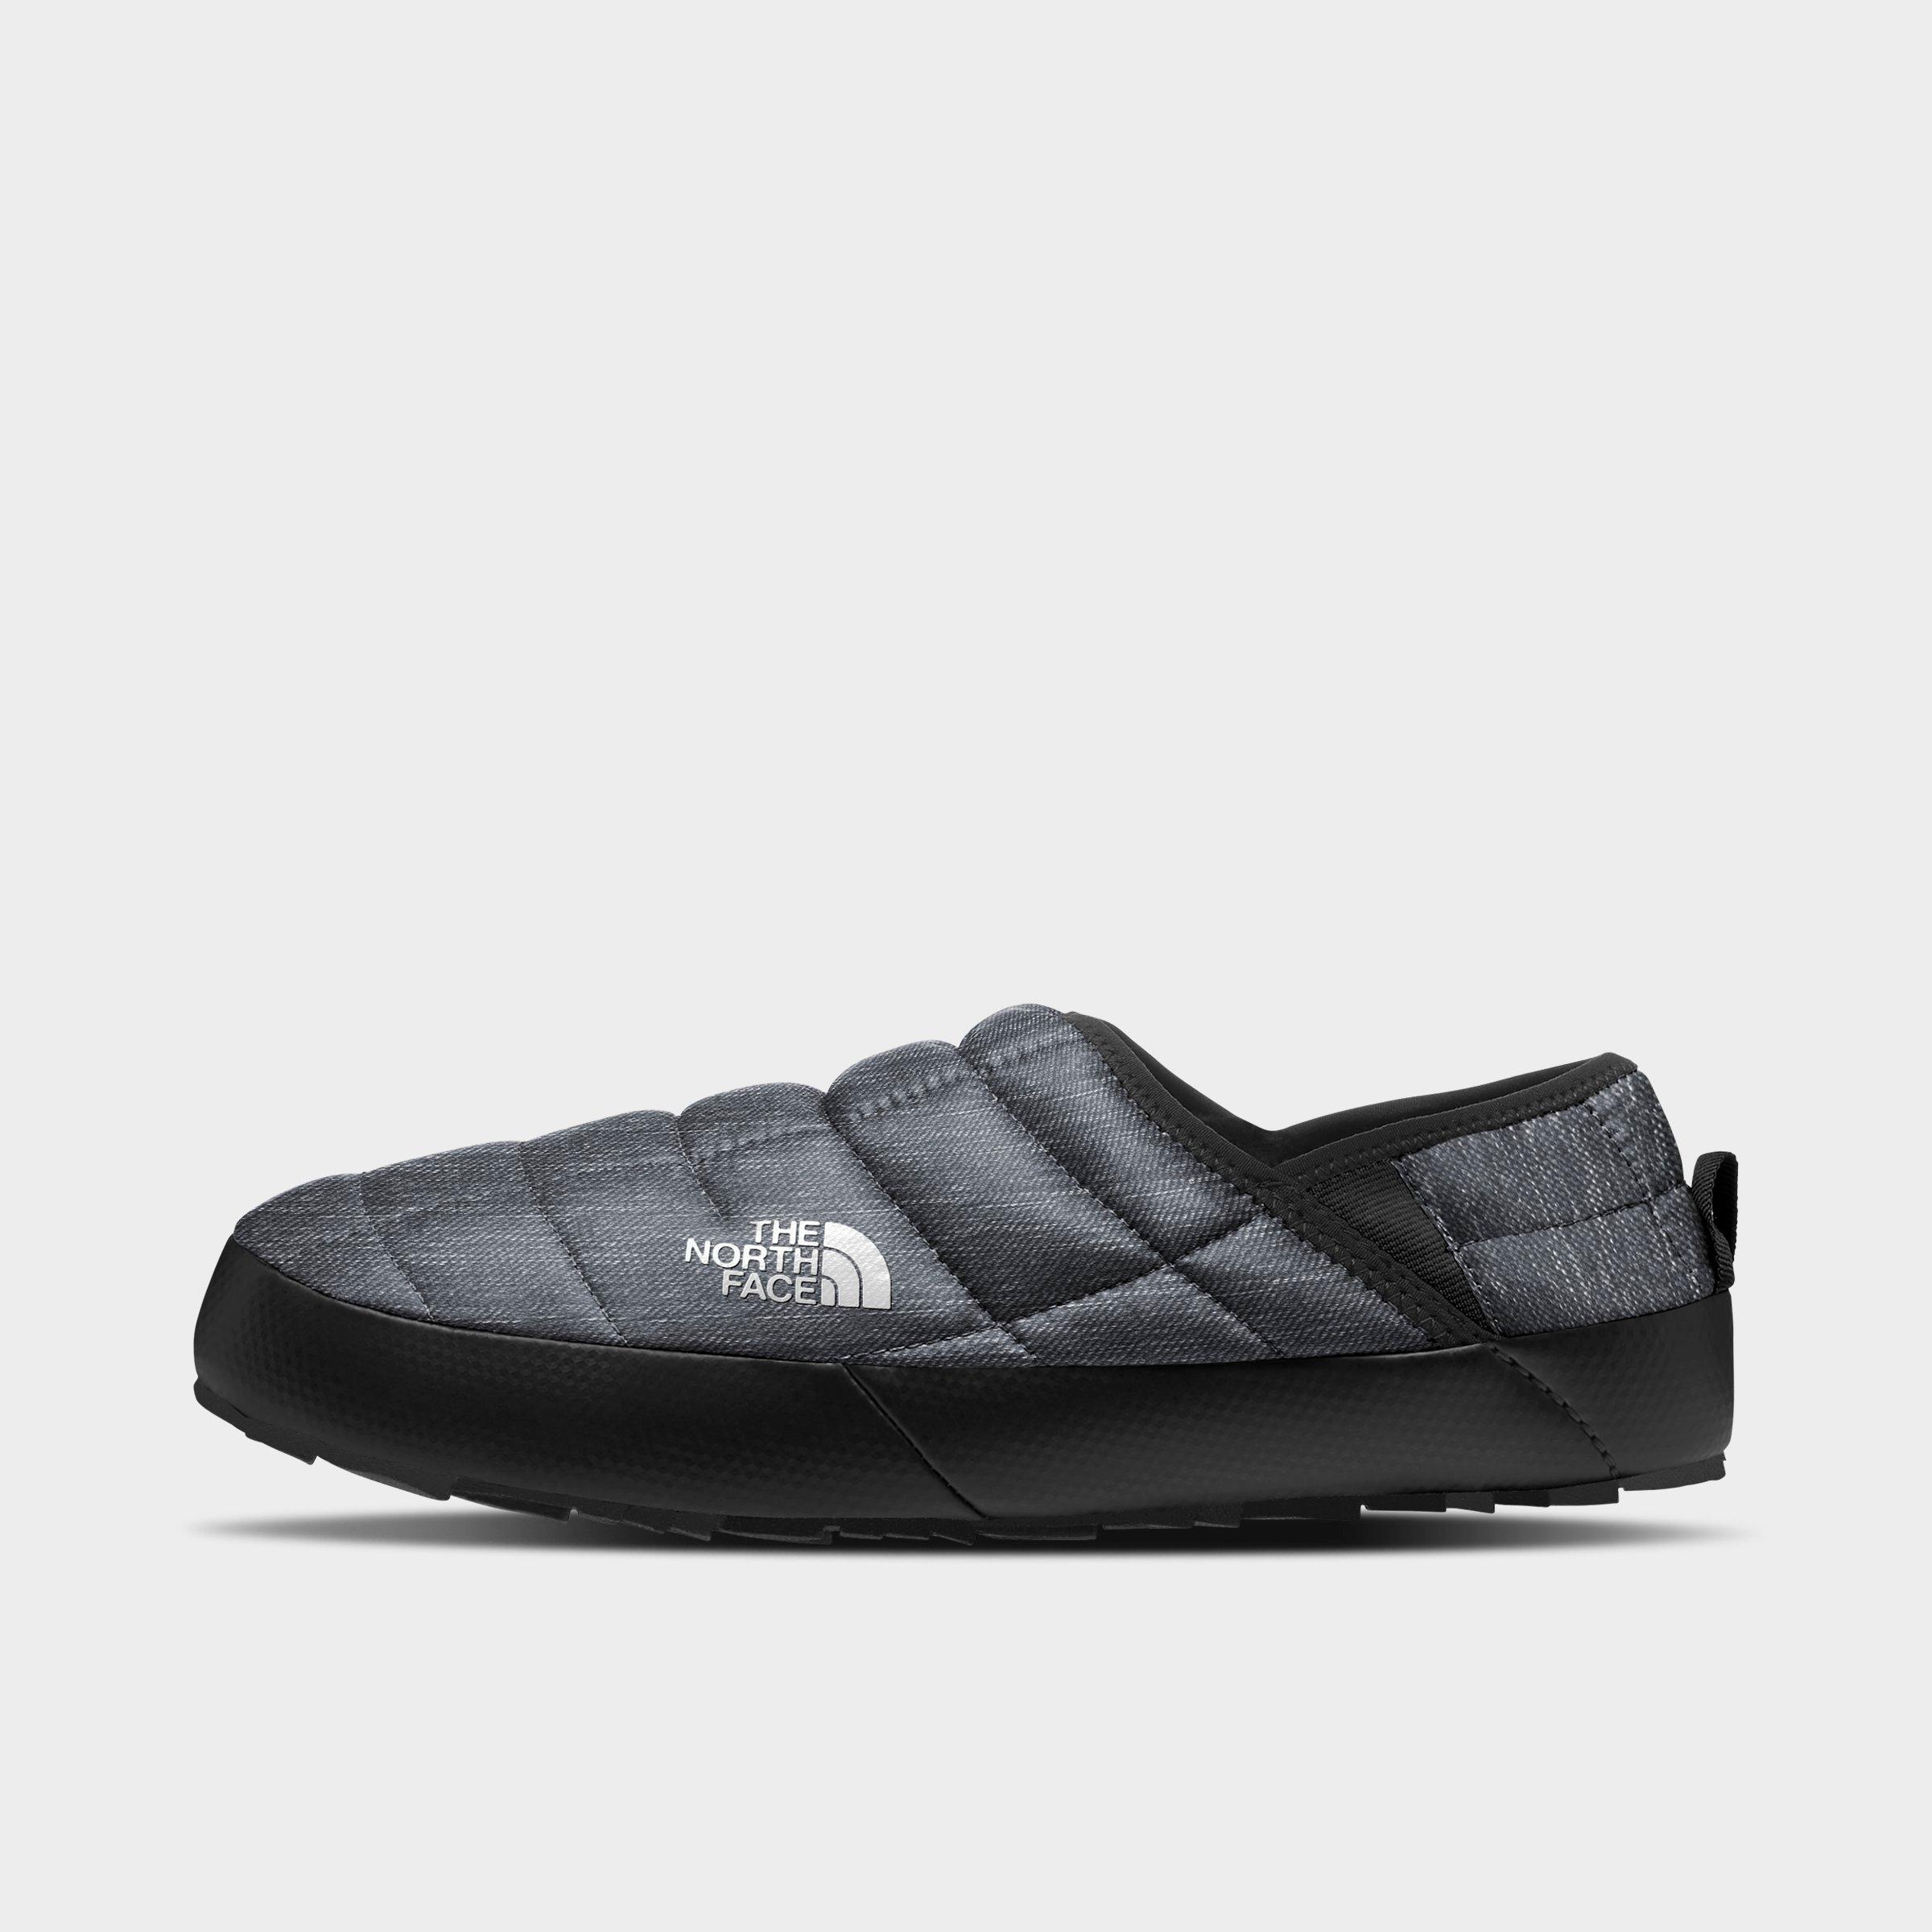 THE NORTH FACE THE NORTH FACE INC MEN'S THERMOBALL&TRADE; TRACTION MULE V SLIP-ON CASUAL SHOES